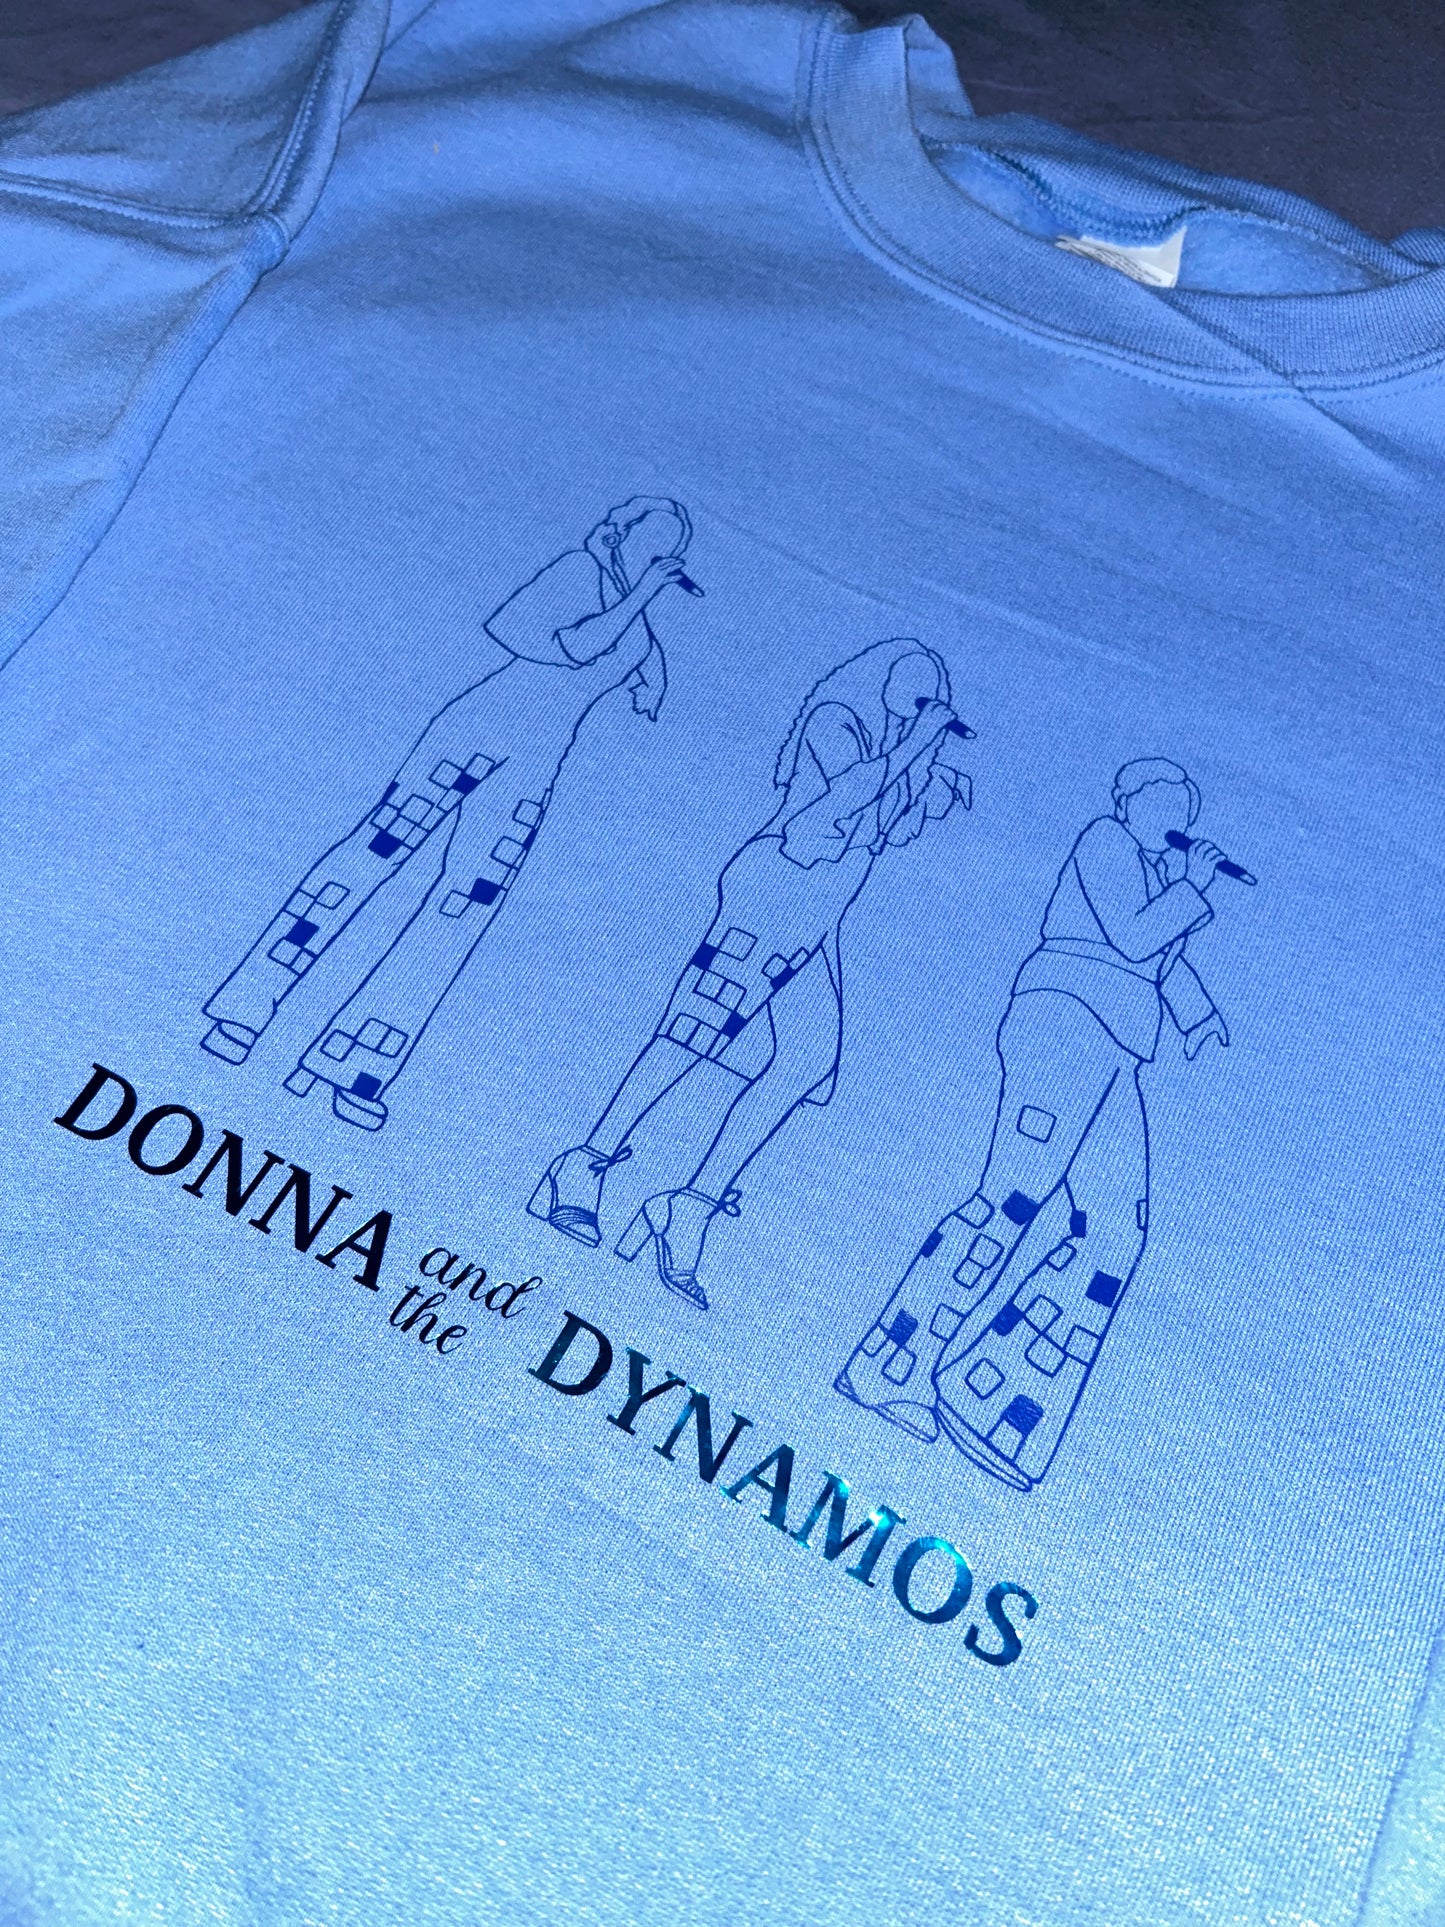 Mamma Mia! Nederland - Sweater "Donna and the Dynamos"